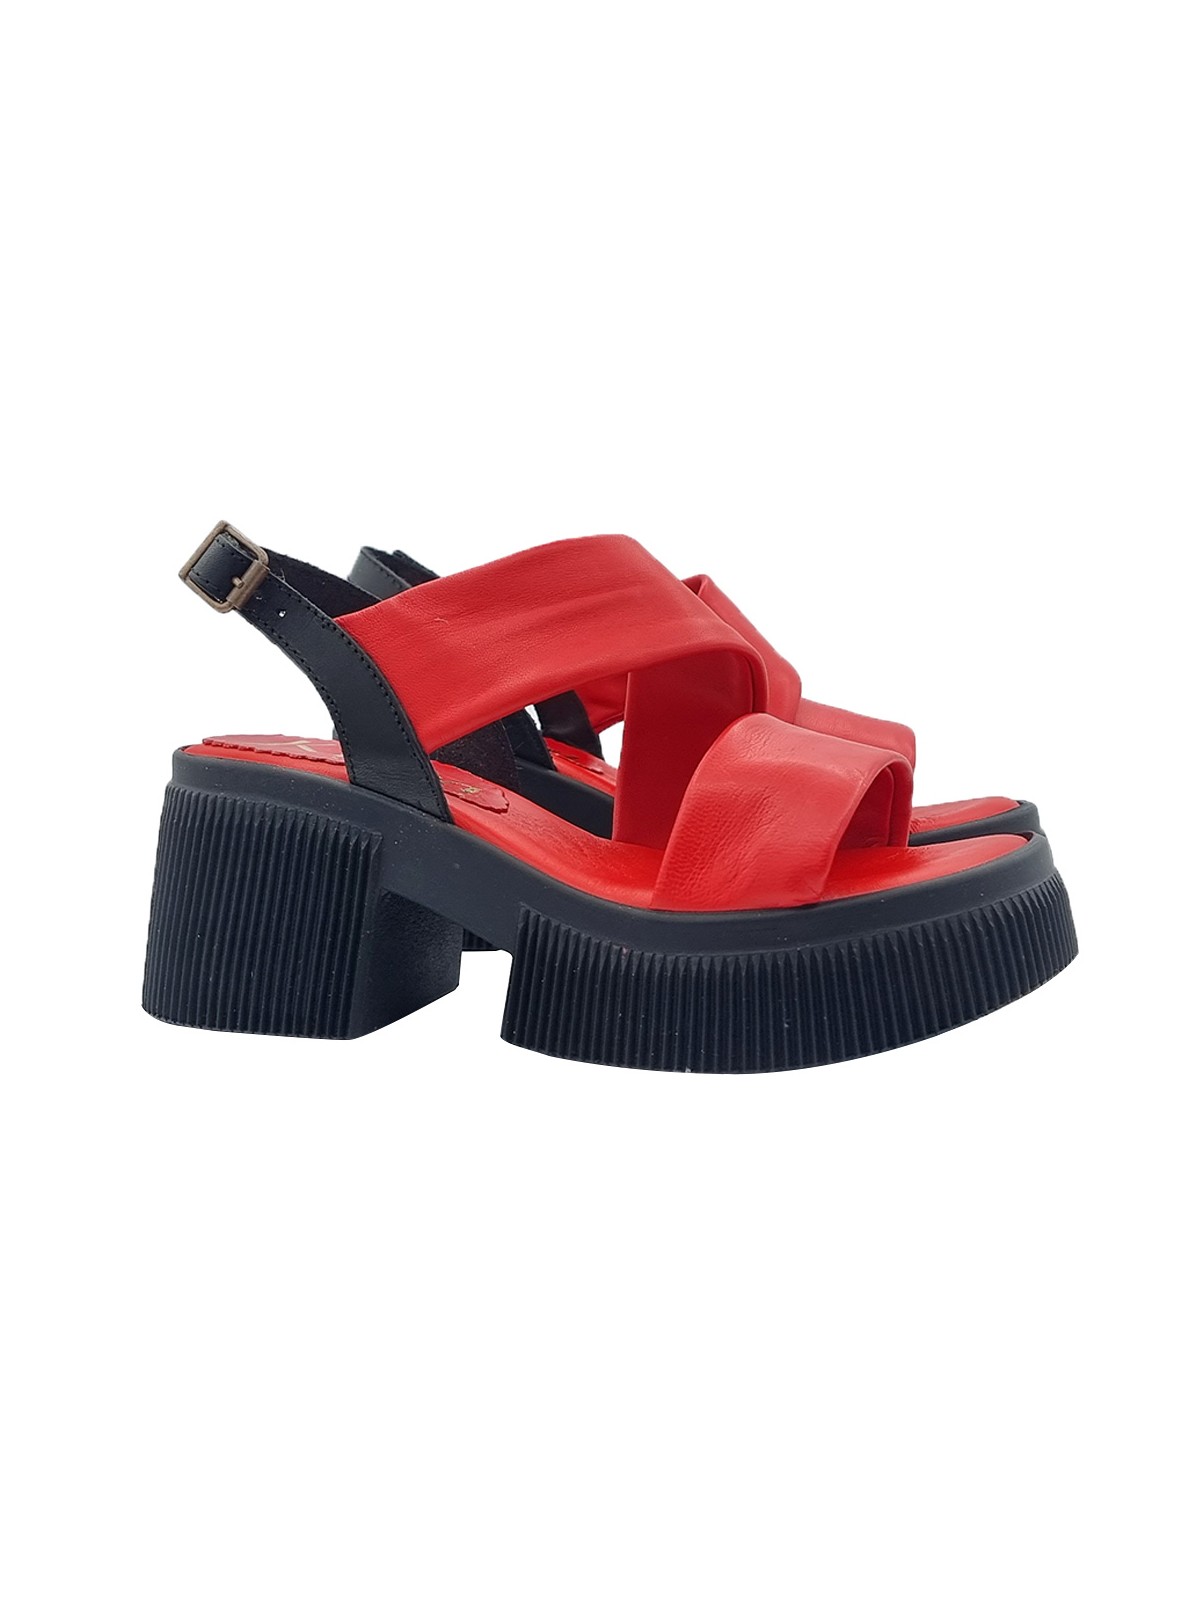 SANDALS WITH RED LEATHER BAND AND 7 CM HEEL